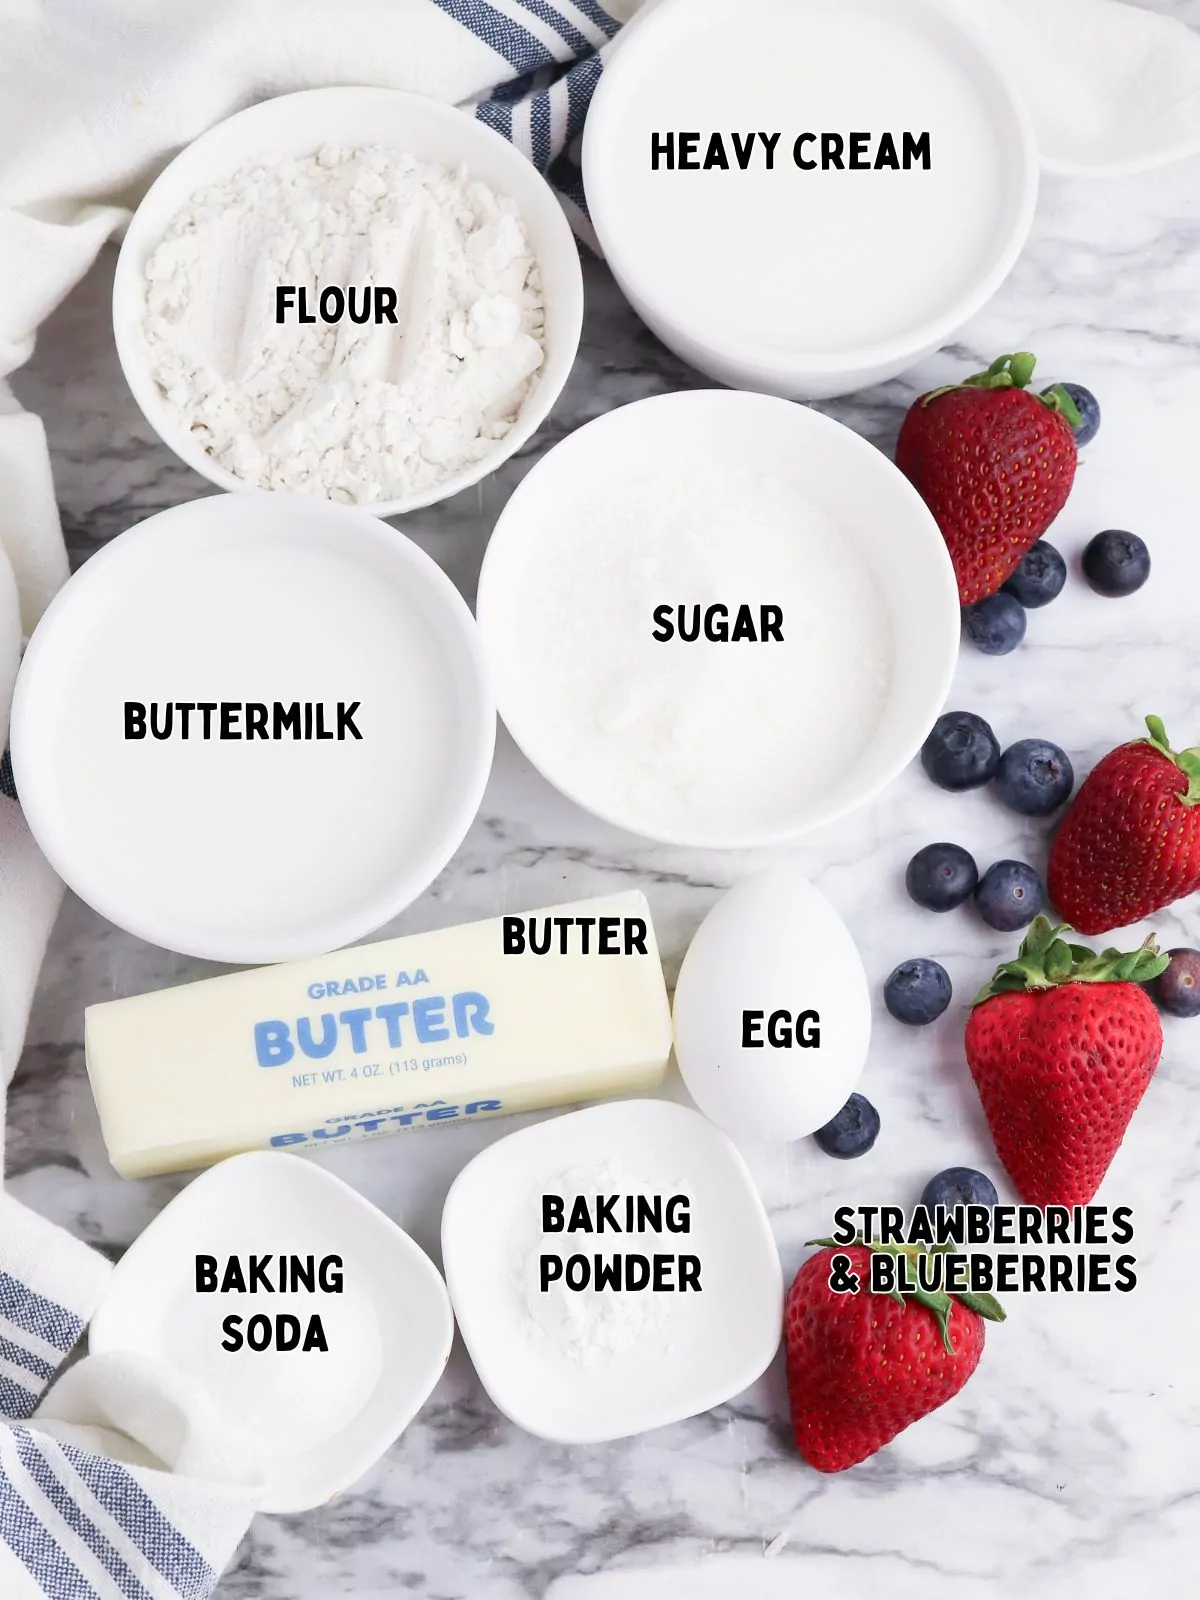 Ingredients for Traditional Strawberry Shortcake